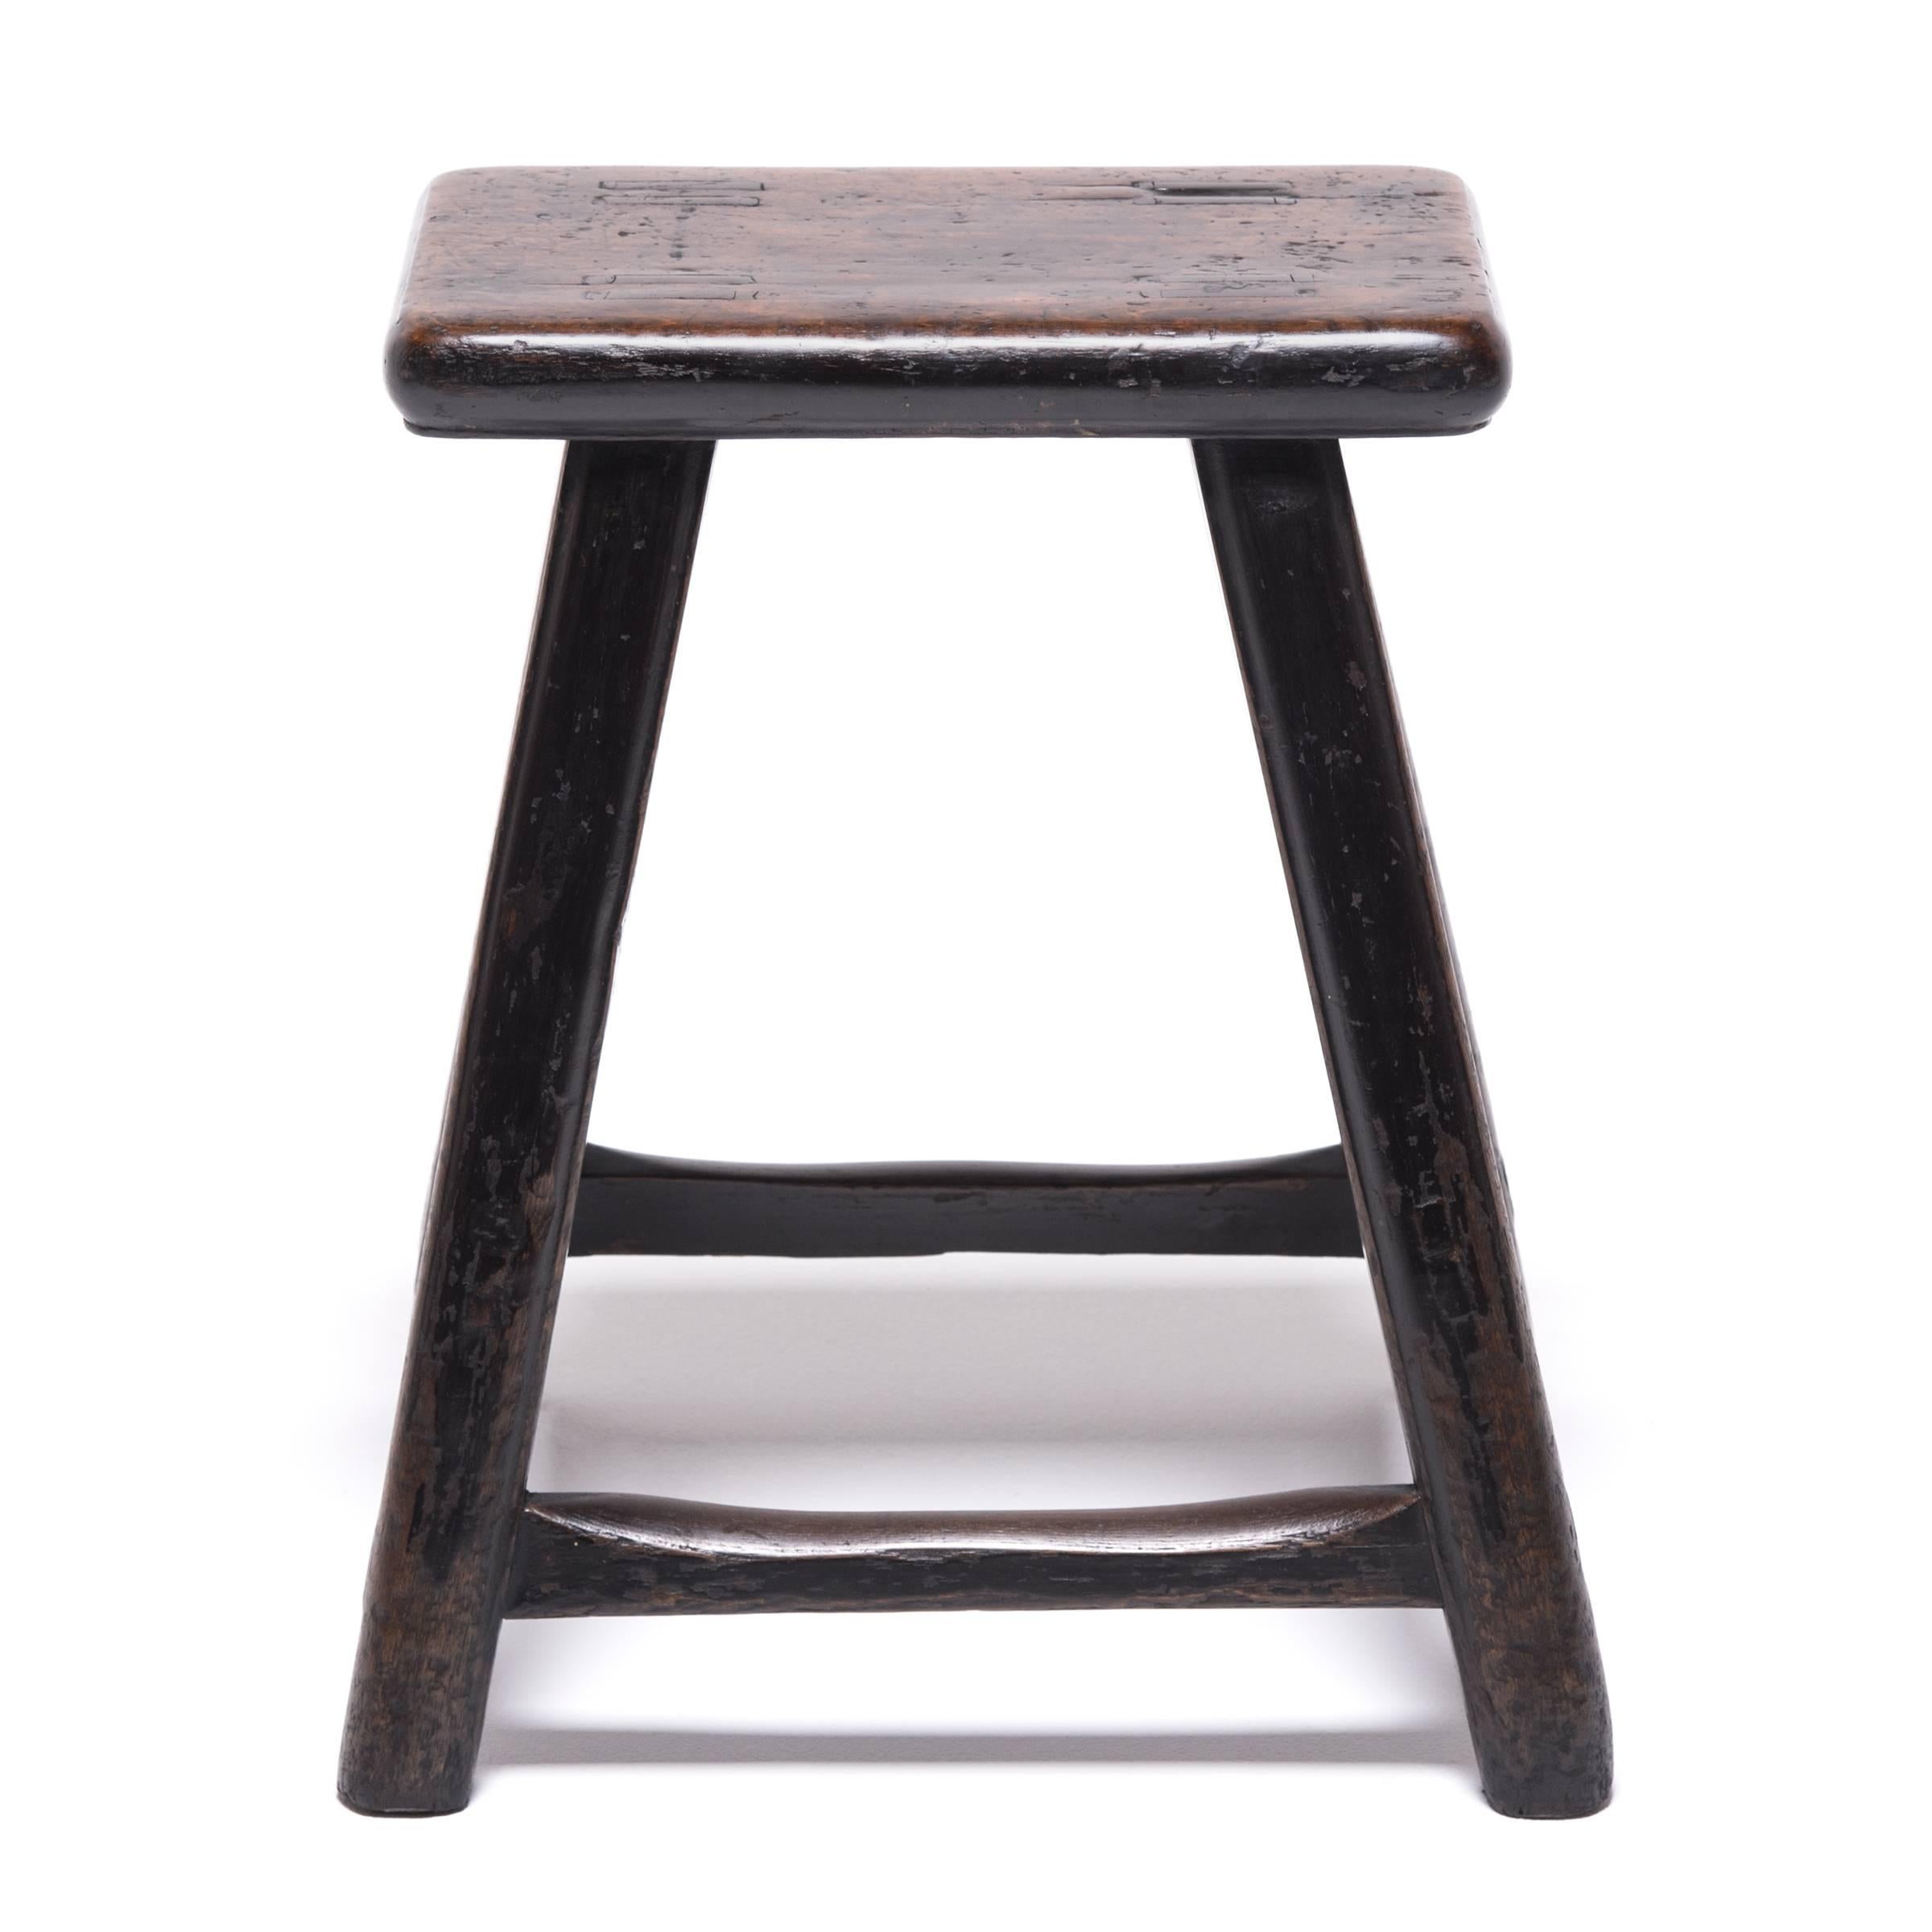 More portable than chairs, stools were a versatile seating option for scholars, business people, and peasants alike. The tapered stance on this pair of stools from Shanxi province shows us how masterfully 19th century carpenters married form and